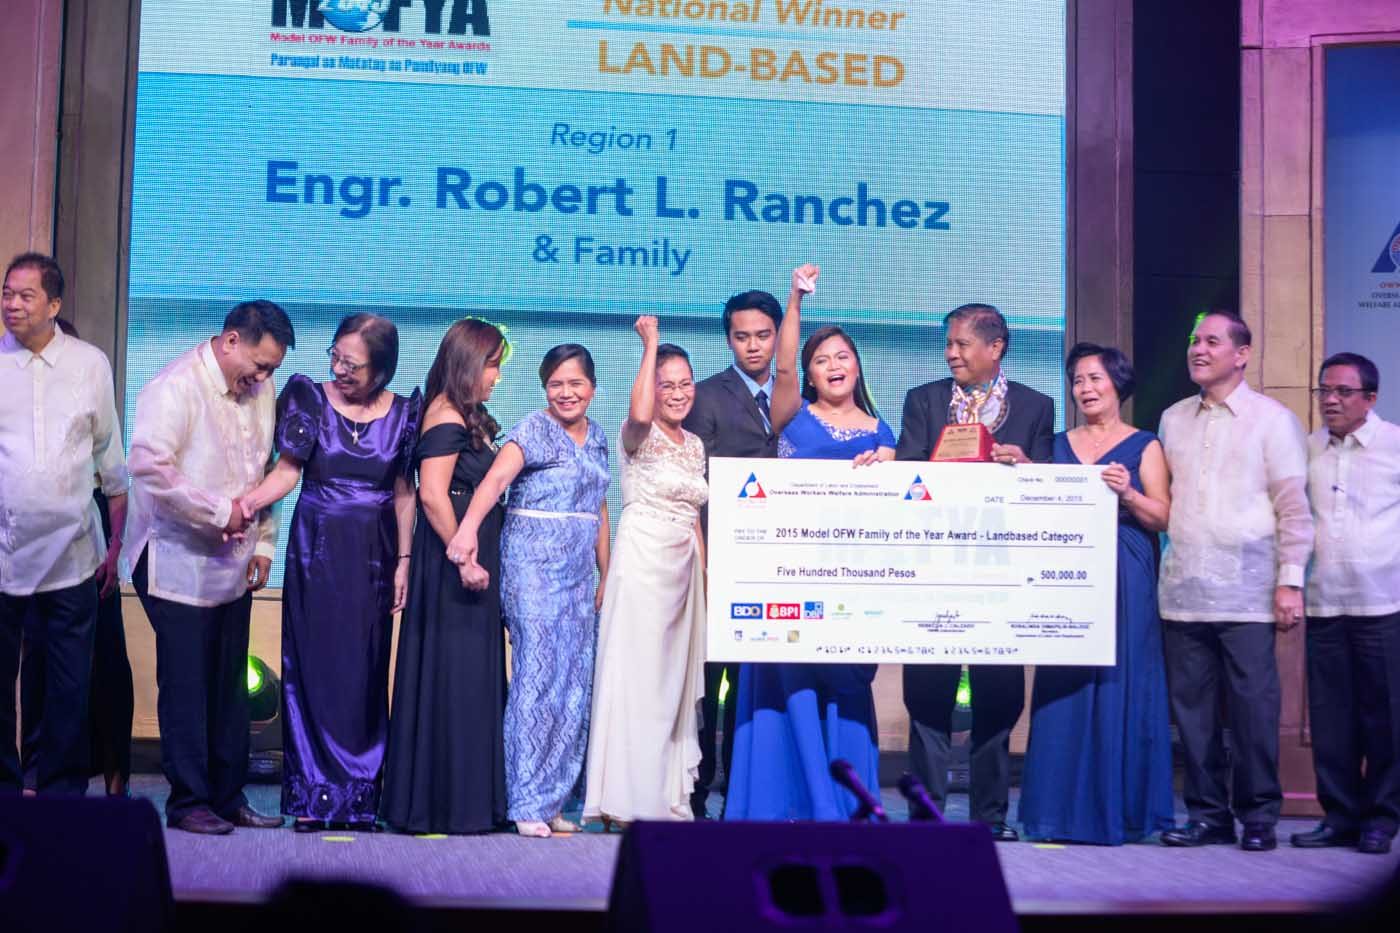 OWWA names model OFW families of the year